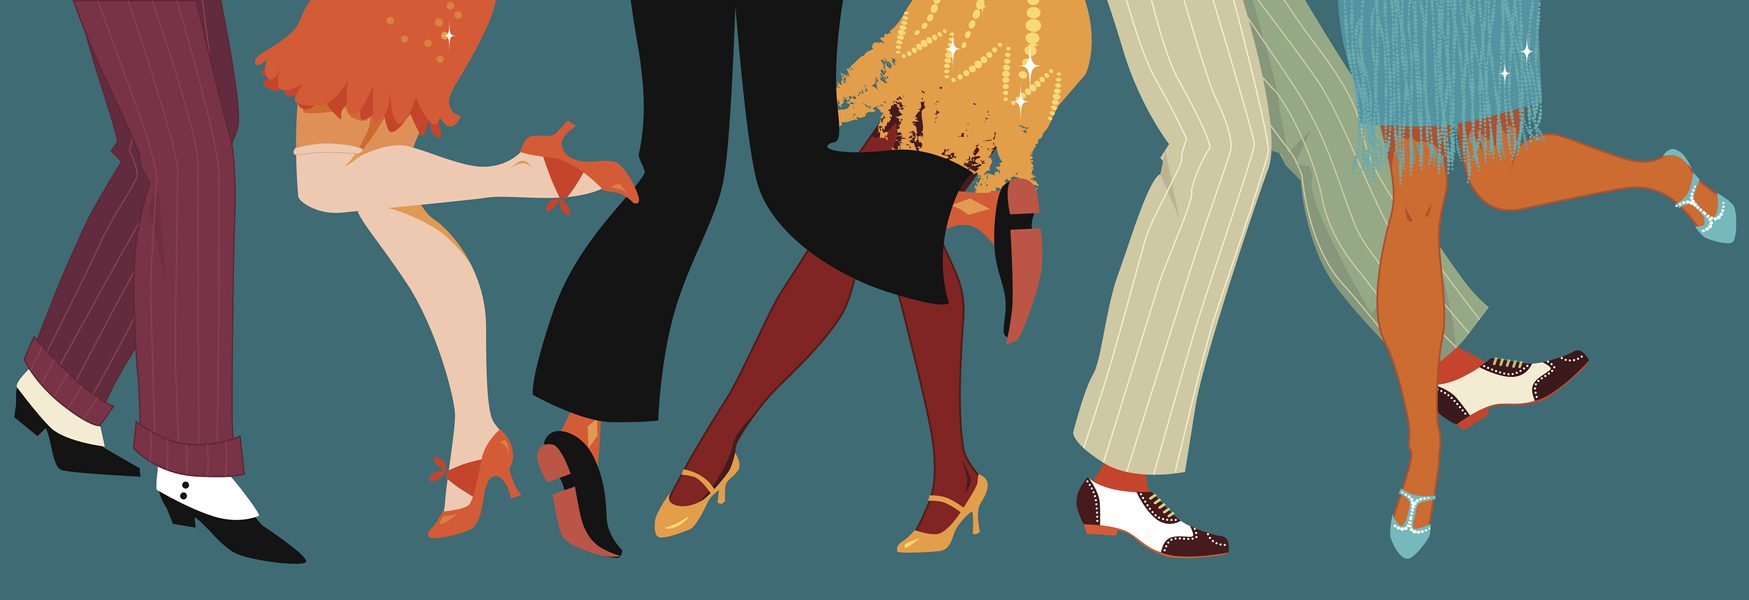 How 1920s high society fashion pushed gender boundaries through ‘freaking’ parties